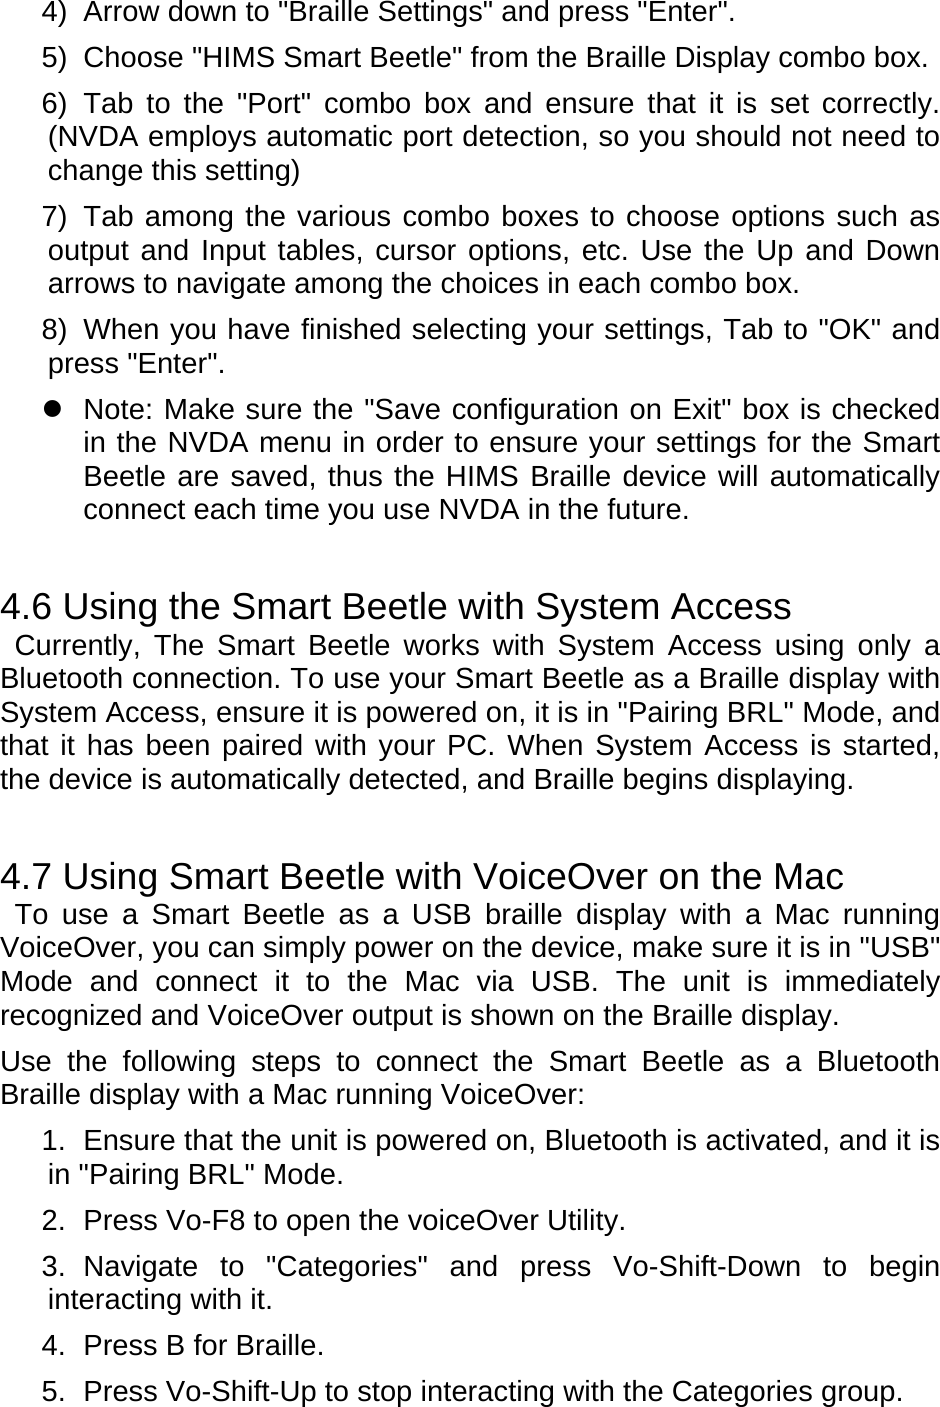 4)  Arrow down to &quot;Braille Settings&quot; and press &quot;Enter&quot;. 5)  Choose &quot;HIMS Smart Beetle&quot; from the Braille Display combo box. 6) Tab to the &quot;Port&quot; combo box and ensure that it is set correctly. (NVDA employs automatic port detection, so you should not need to change this setting) 7)  Tab among the various combo boxes to choose options such as output and Input tables, cursor options, etc. Use the Up and Down arrows to navigate among the choices in each combo box. 8)  When you have finished selecting your settings, Tab to &quot;OK&quot; and press &quot;Enter&quot;.   Note: Make sure the &quot;Save configuration on Exit&quot; box is checked in the NVDA menu in order to ensure your settings for the Smart Beetle are saved, thus the HIMS Braille device will automatically connect each time you use NVDA in the future.   4.6 Using the Smart Beetle with System Access  Currently, The Smart Beetle works with System Access using only a Bluetooth connection. To use your Smart Beetle as a Braille display with System Access, ensure it is powered on, it is in &quot;Pairing BRL&quot; Mode, and that it has been paired with your PC. When System Access is started, the device is automatically detected, and Braille begins displaying.   4.7 Using Smart Beetle with VoiceOver on the Mac  To use a Smart Beetle as a USB braille display with a Mac running VoiceOver, you can simply power on the device, make sure it is in &quot;USB&quot; Mode and connect it to the Mac via USB. The unit is immediately recognized and VoiceOver output is shown on the Braille display. Use the following steps to connect the Smart Beetle as a Bluetooth Braille display with a Mac running VoiceOver: 1.  Ensure that the unit is powered on, Bluetooth is activated, and it is in &quot;Pairing BRL&quot; Mode. 2.  Press Vo-F8 to open the voiceOver Utility. 3. Navigate to &quot;Categories&quot; and press Vo-Shift-Down to begin interacting with it. 4.  Press B for Braille. 5.  Press Vo-Shift-Up to stop interacting with the Categories group. 